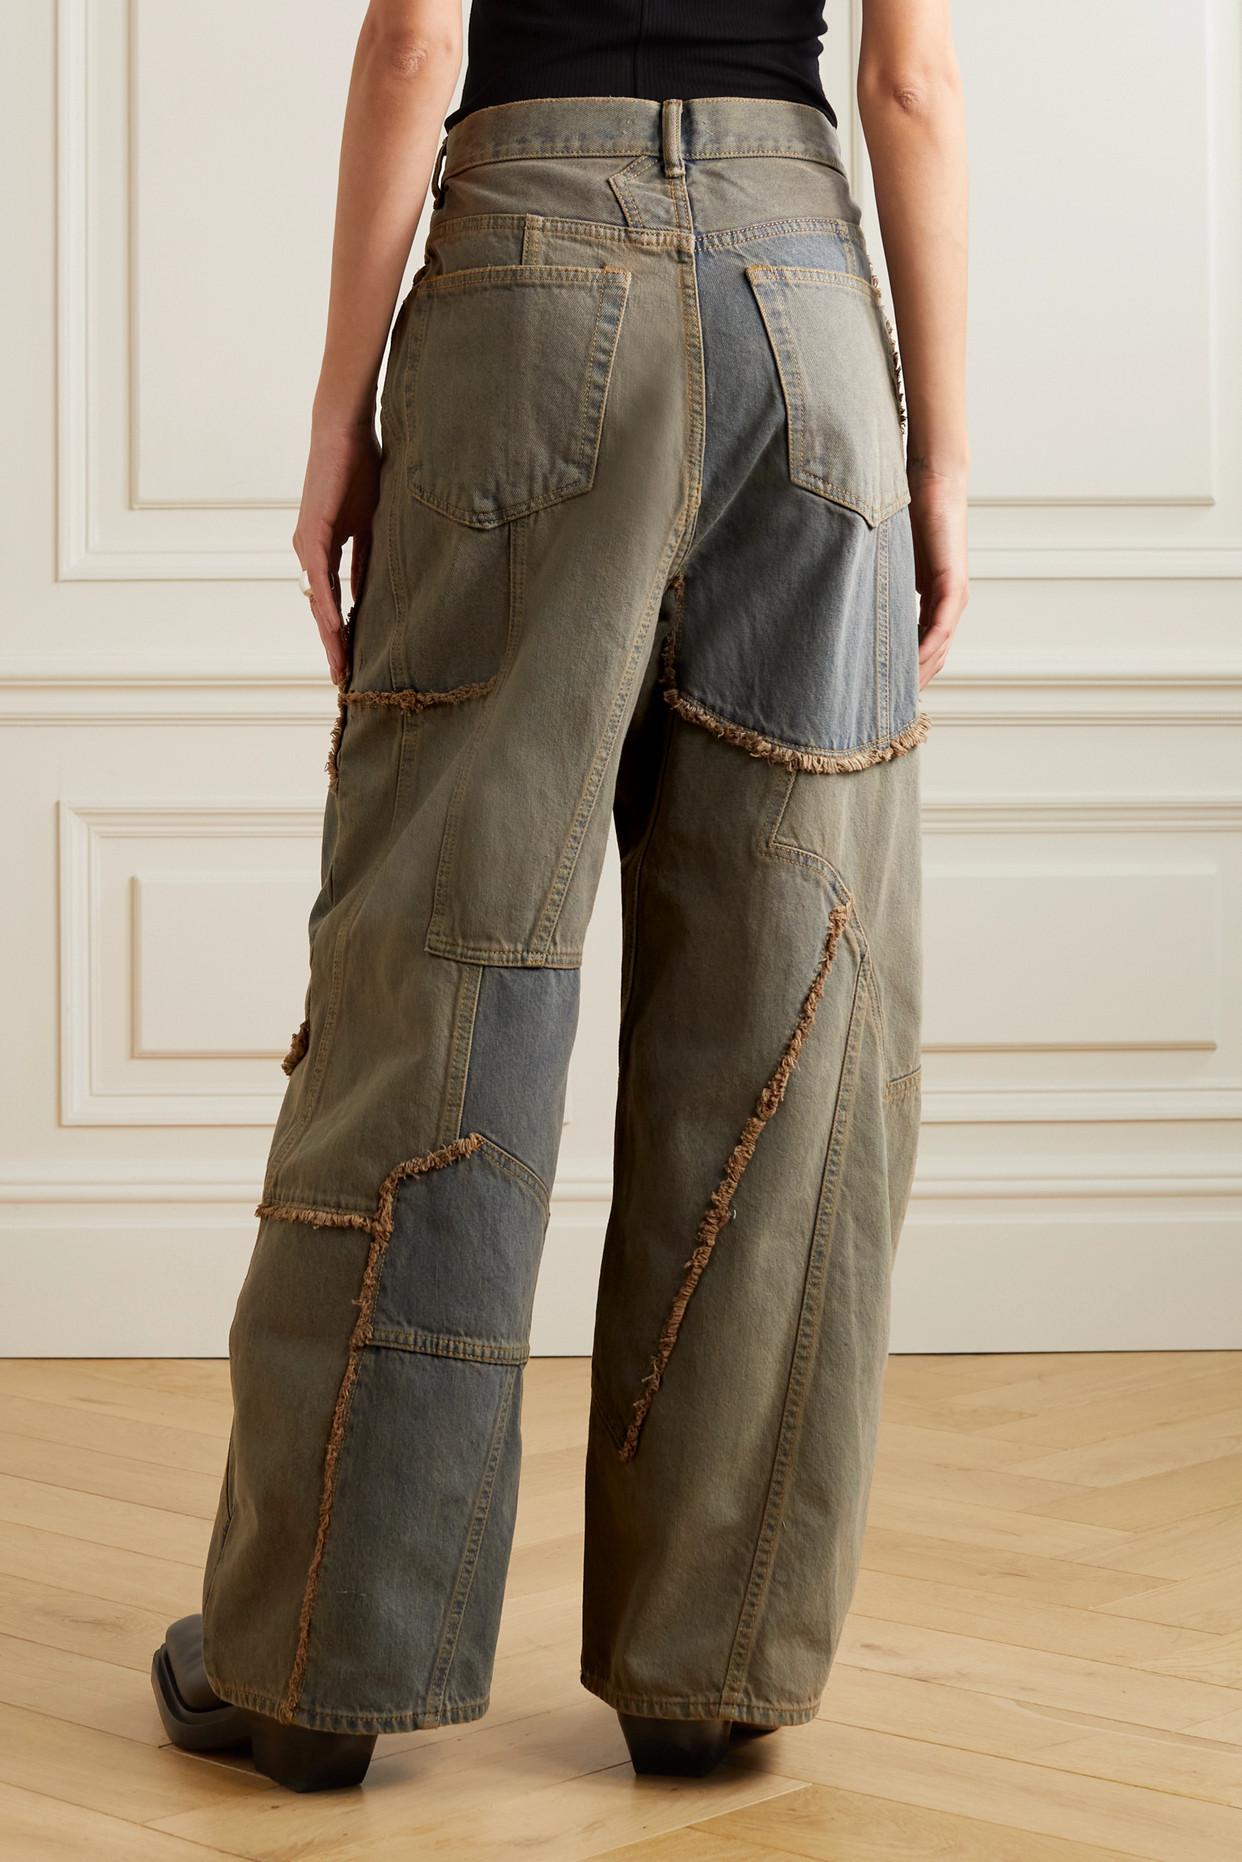 Acne Studios Distressed Patchwork Jeans in Gray | Lyst